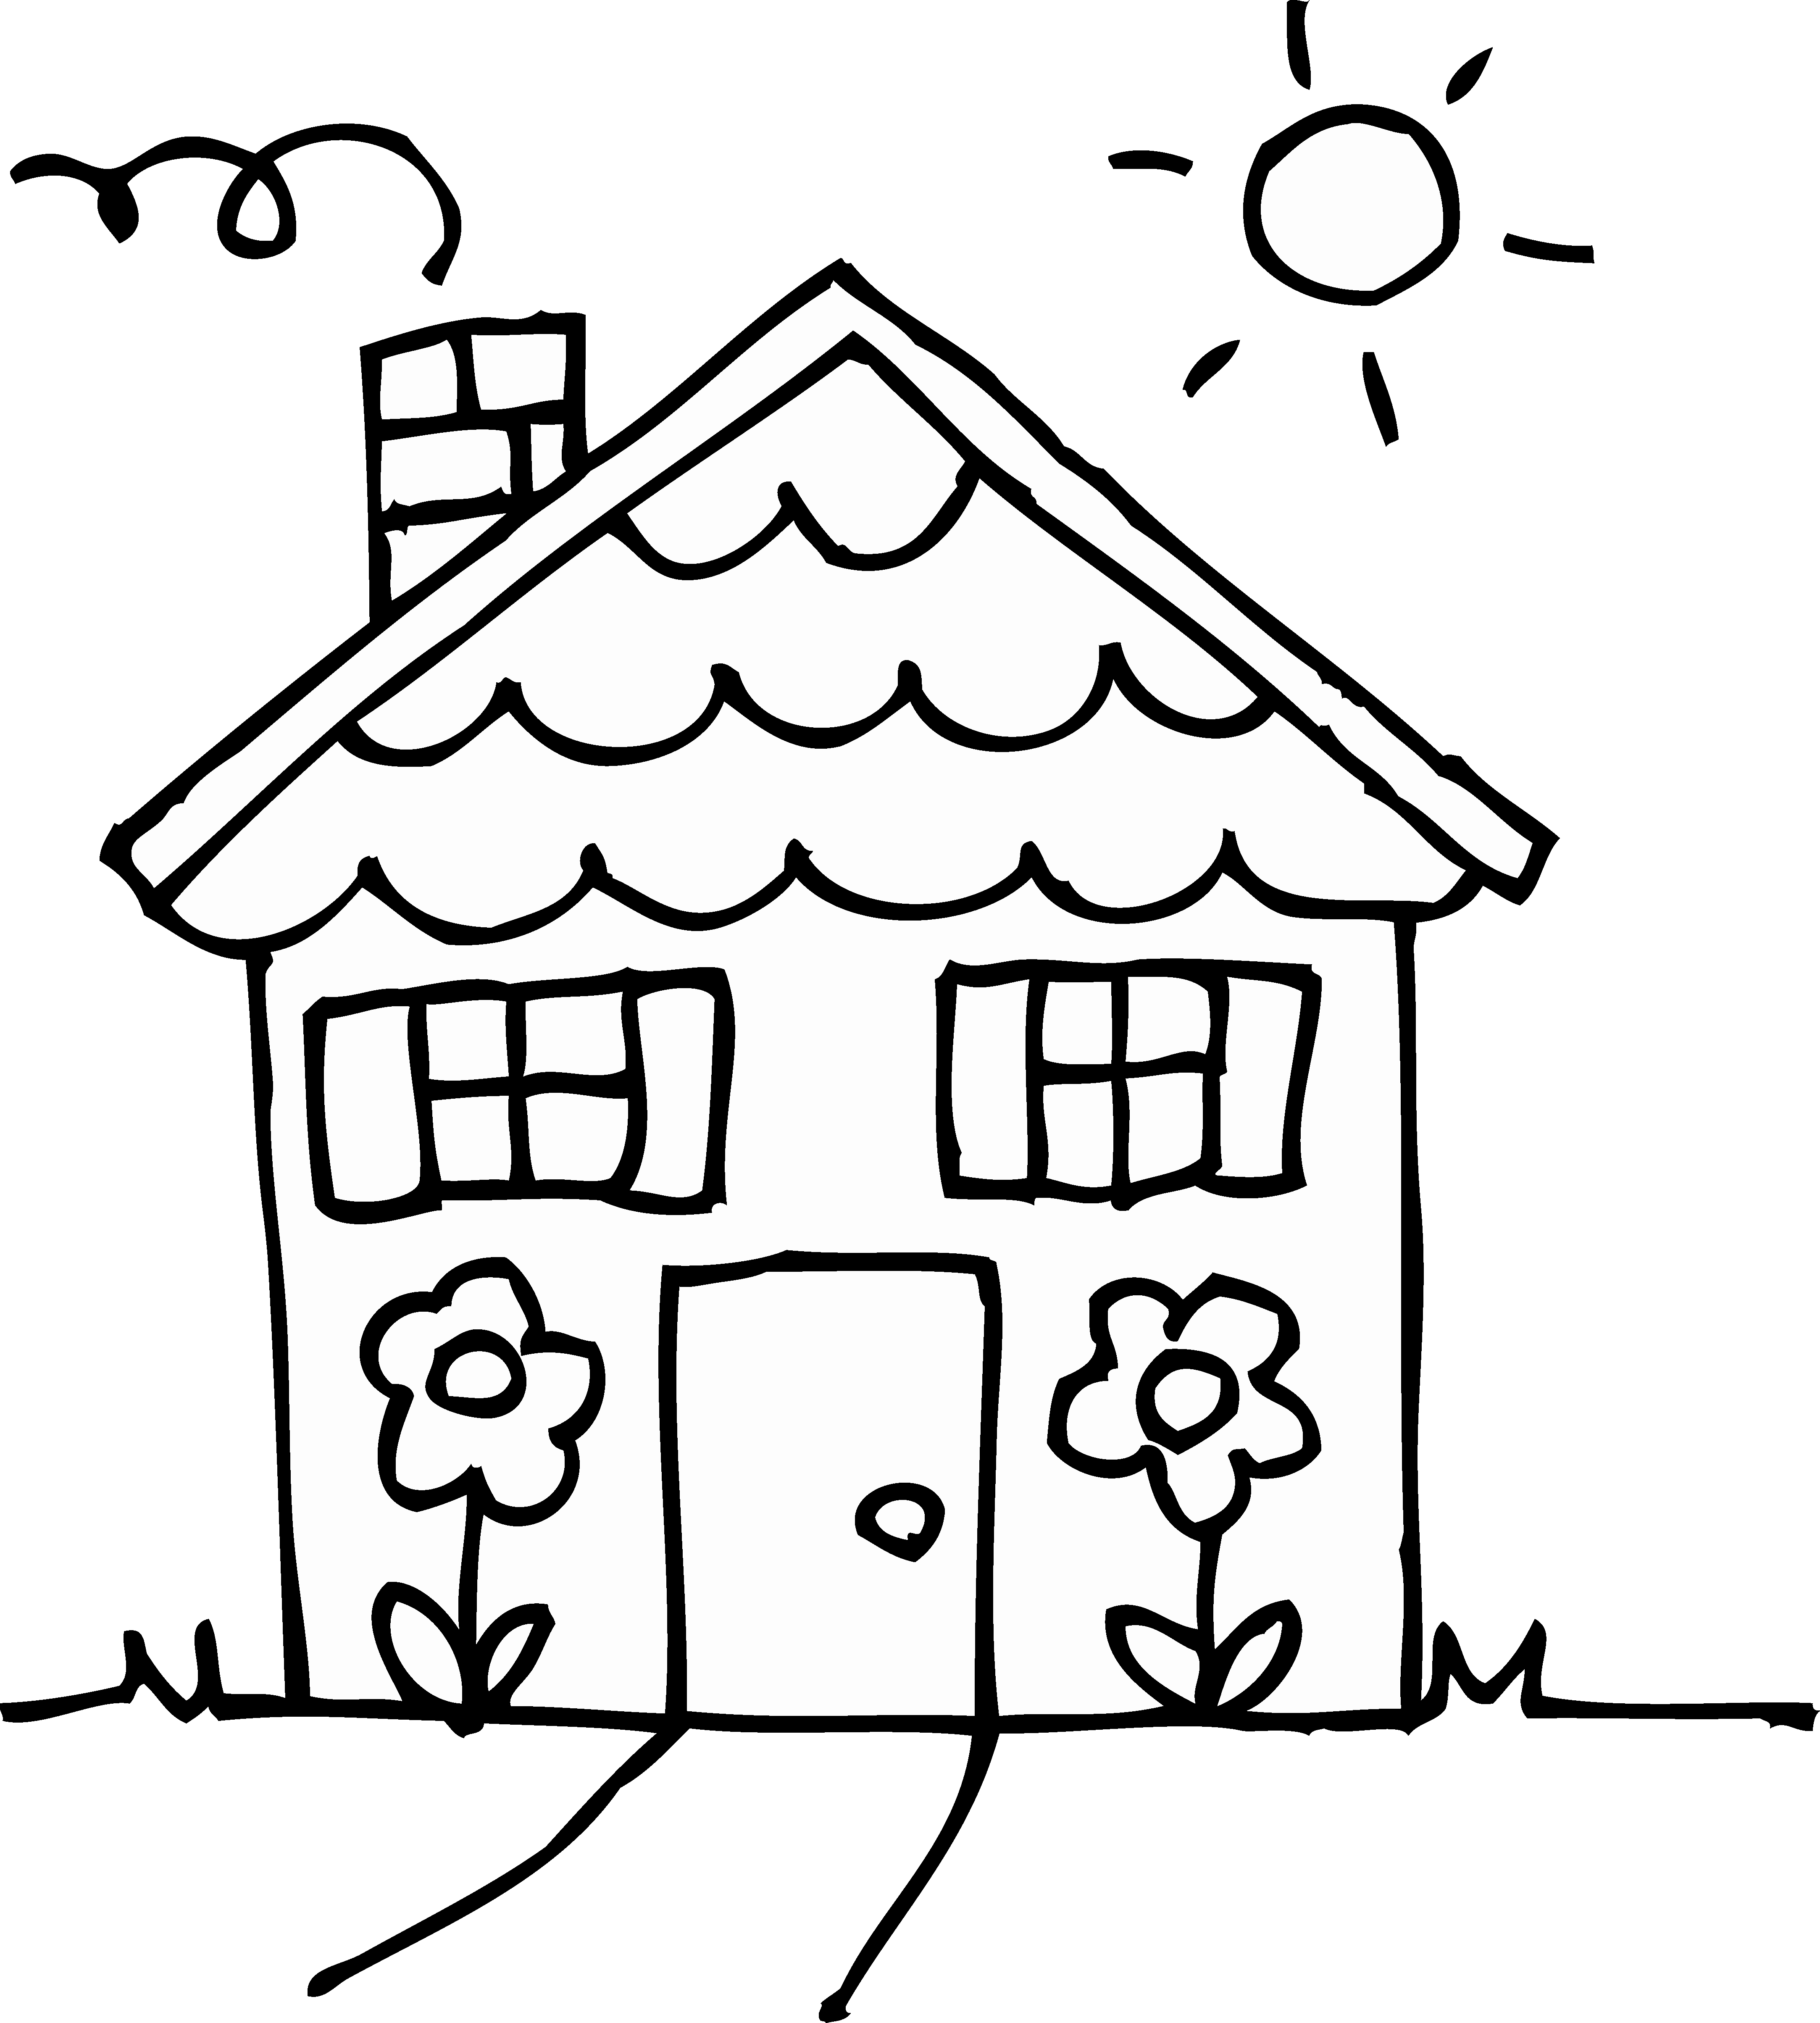 Sunny Day Coloring Pages at GetDrawings.com | Free for ...